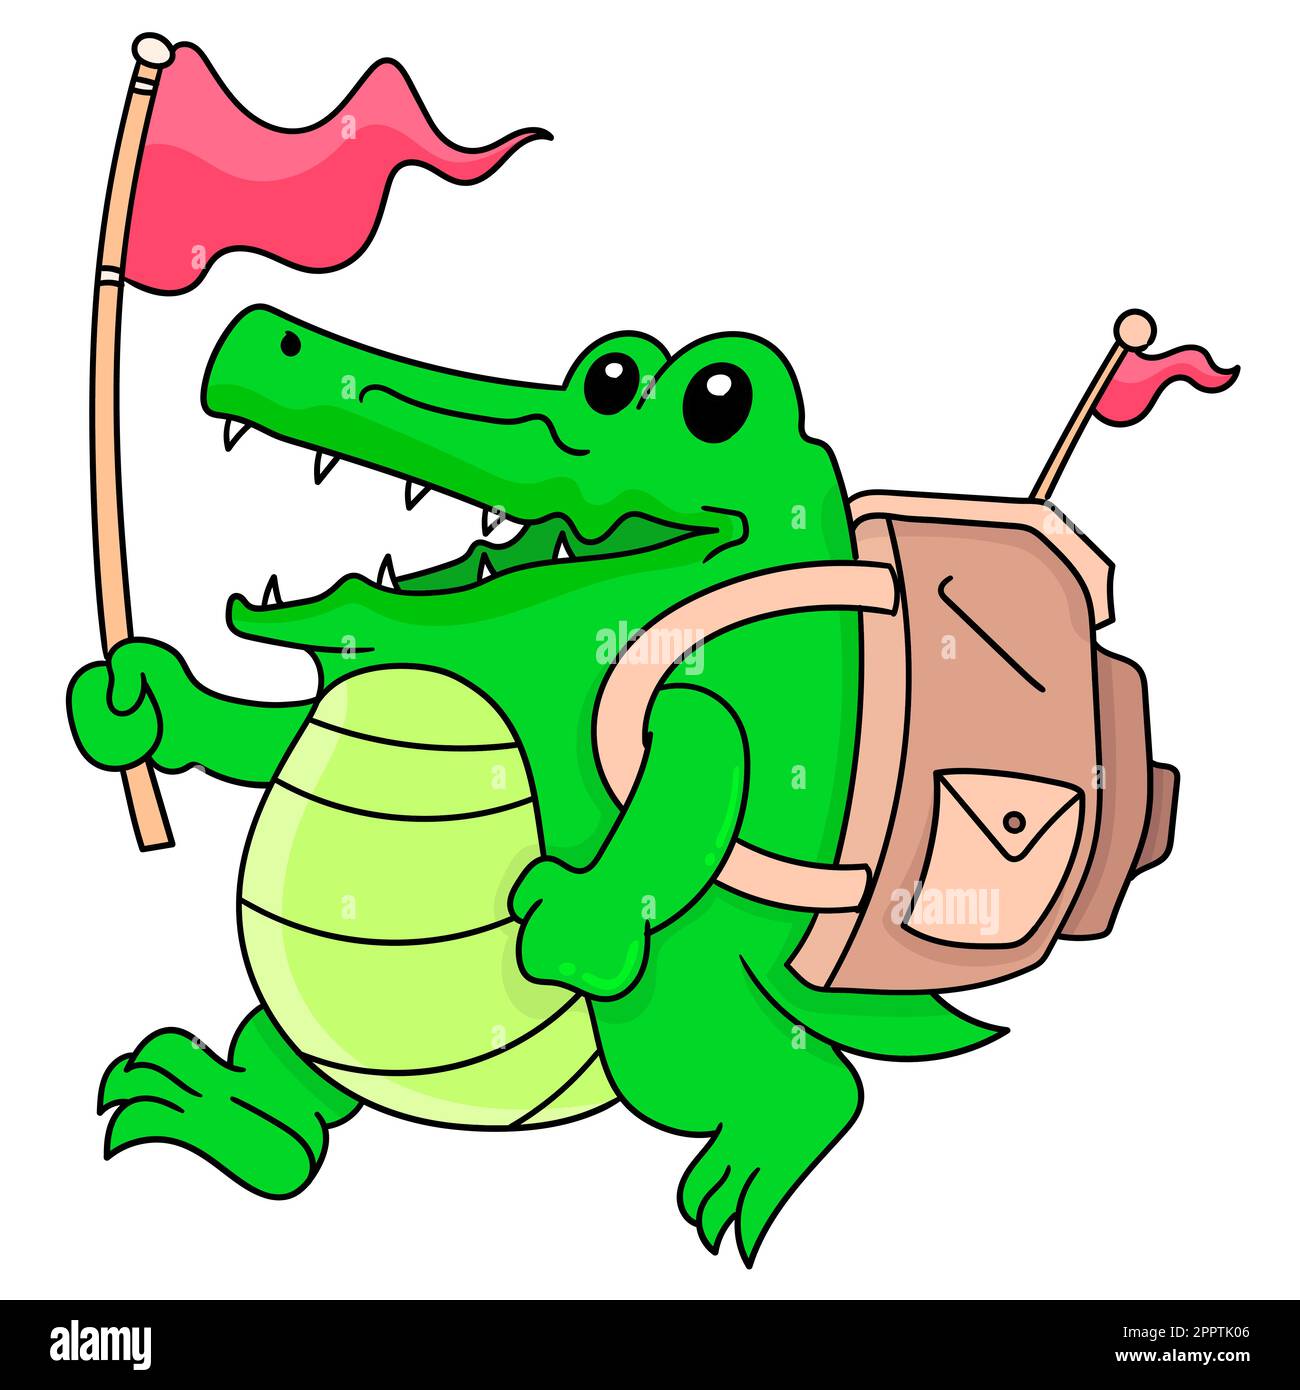 a green crocodile boy carrying a bag with a happy face goes on an adventure, doodle icon image kawaii Stock Vector